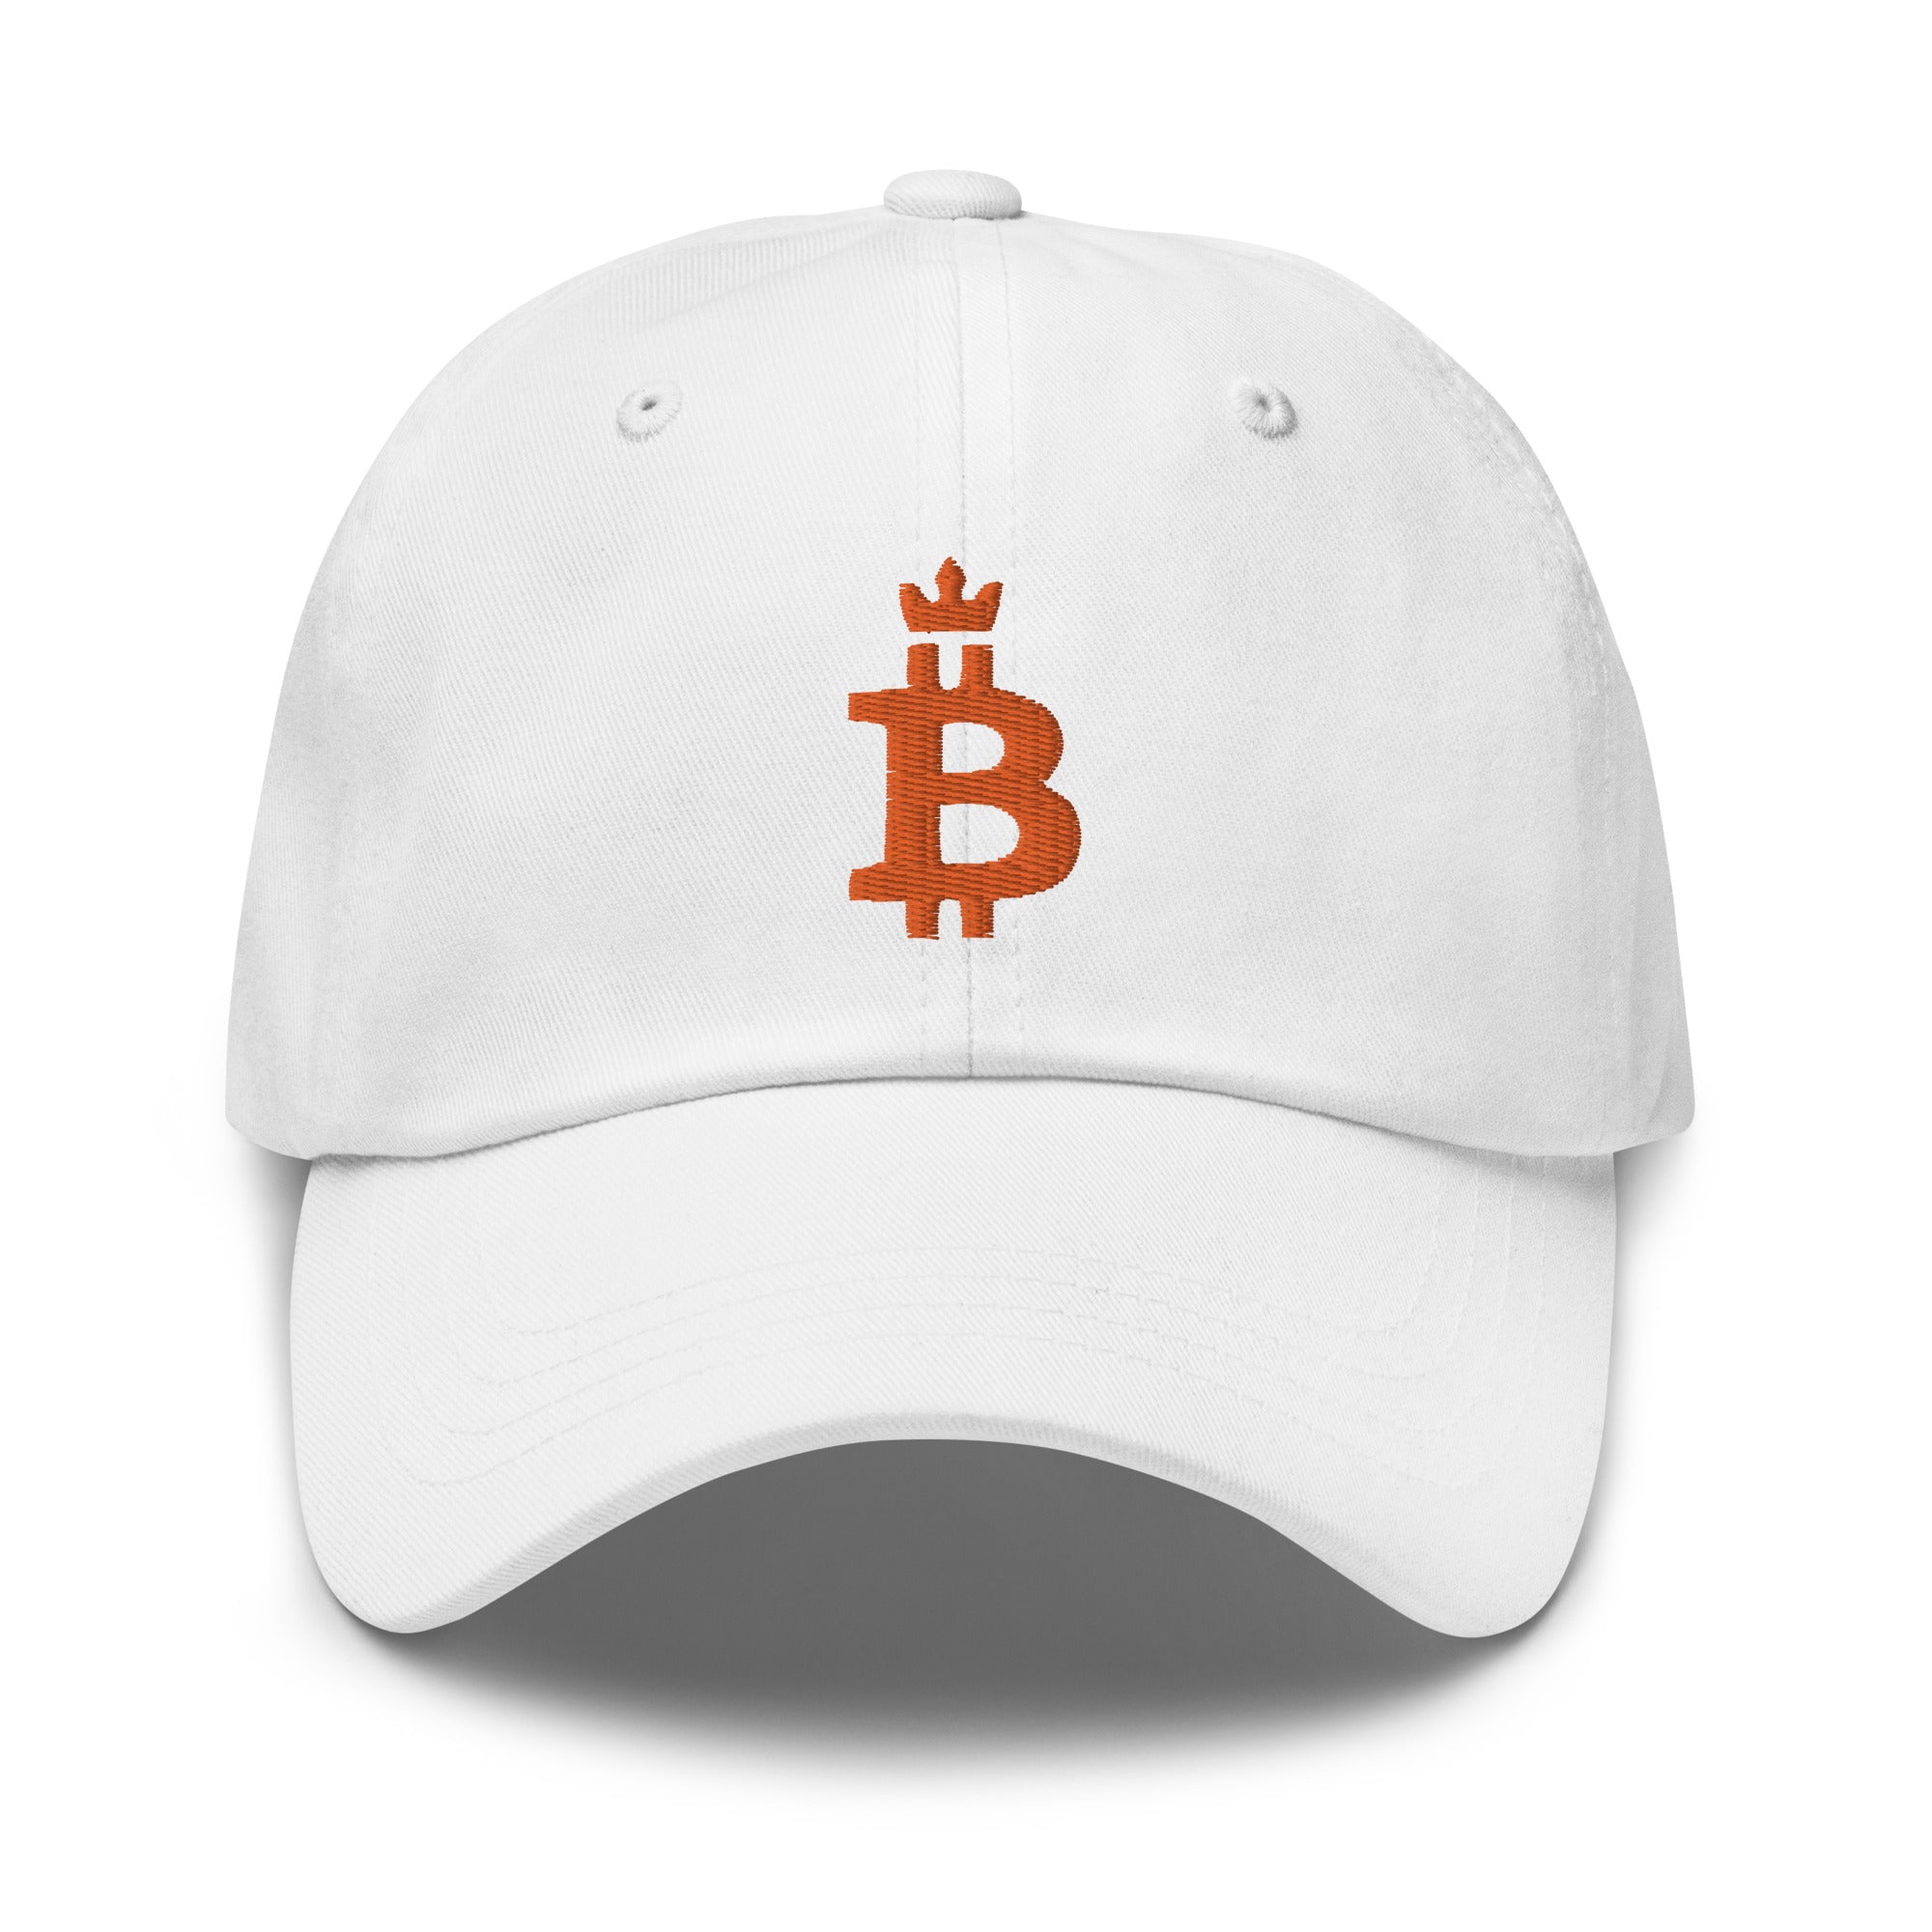 Bitcoin Hat - This Bitcoin Dominance Hat features an embroidered design on a white cap. Front view.